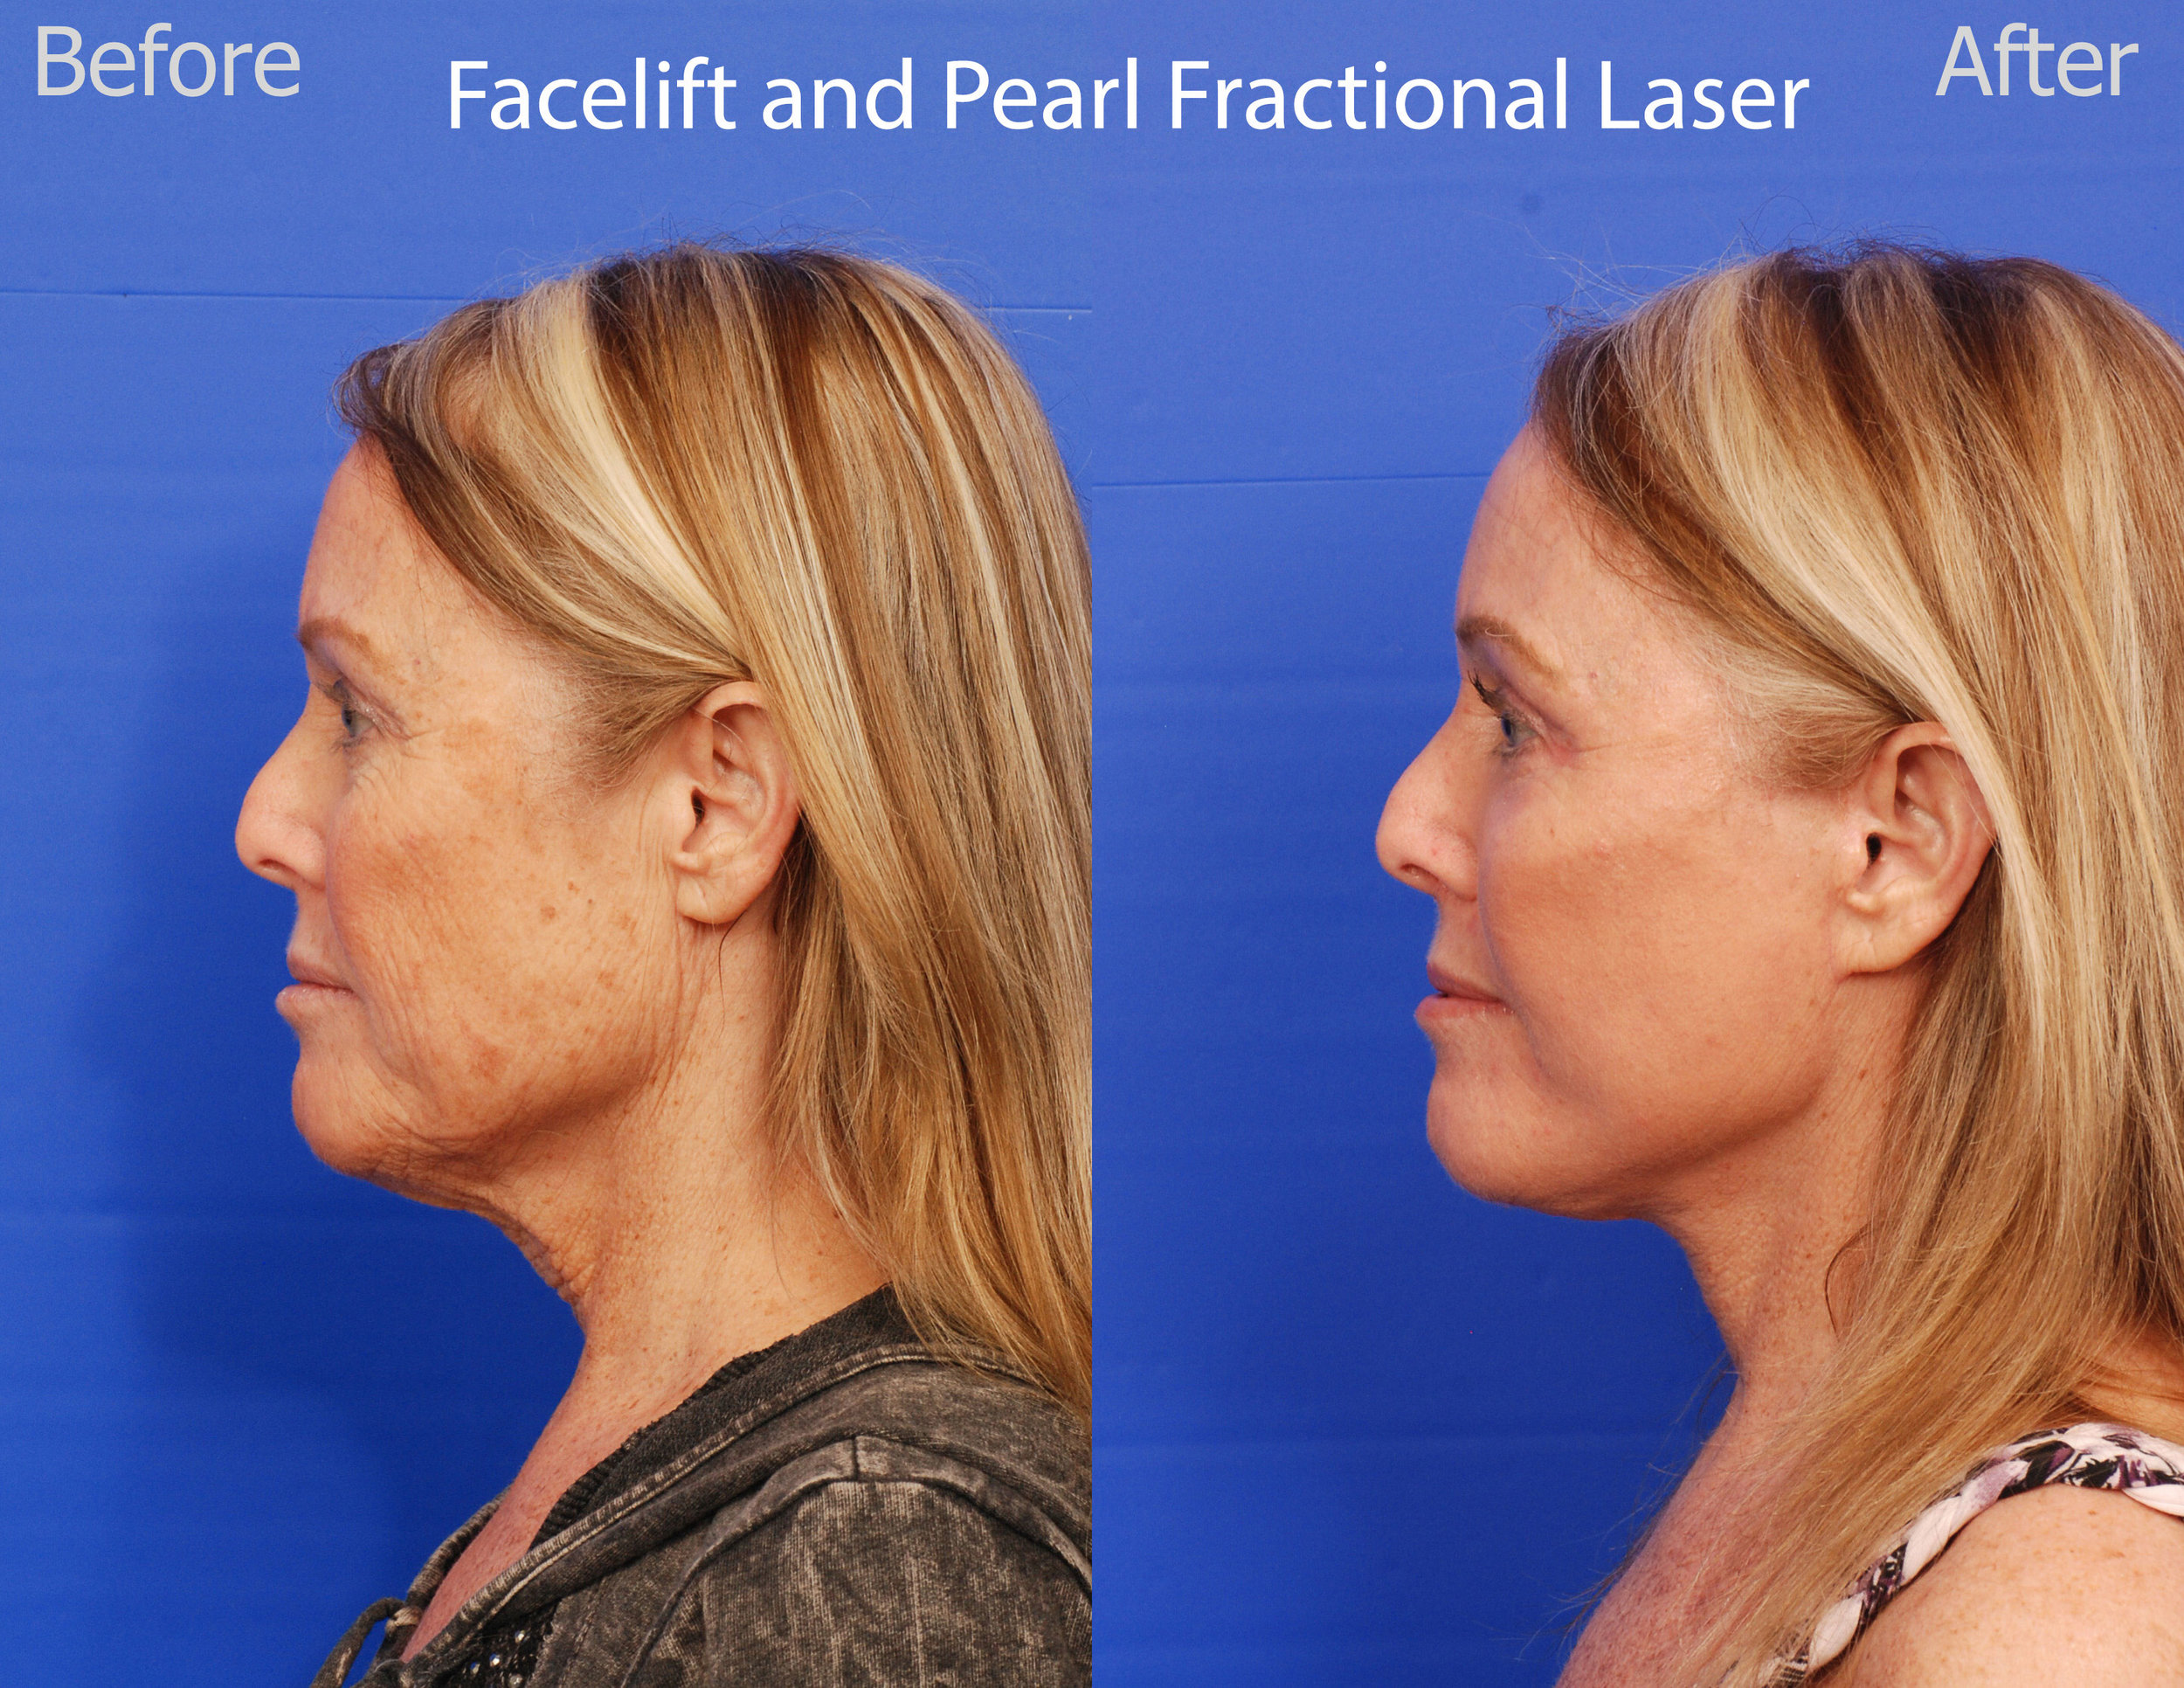 Facelift and Pearl Fractional Laser - San Diego